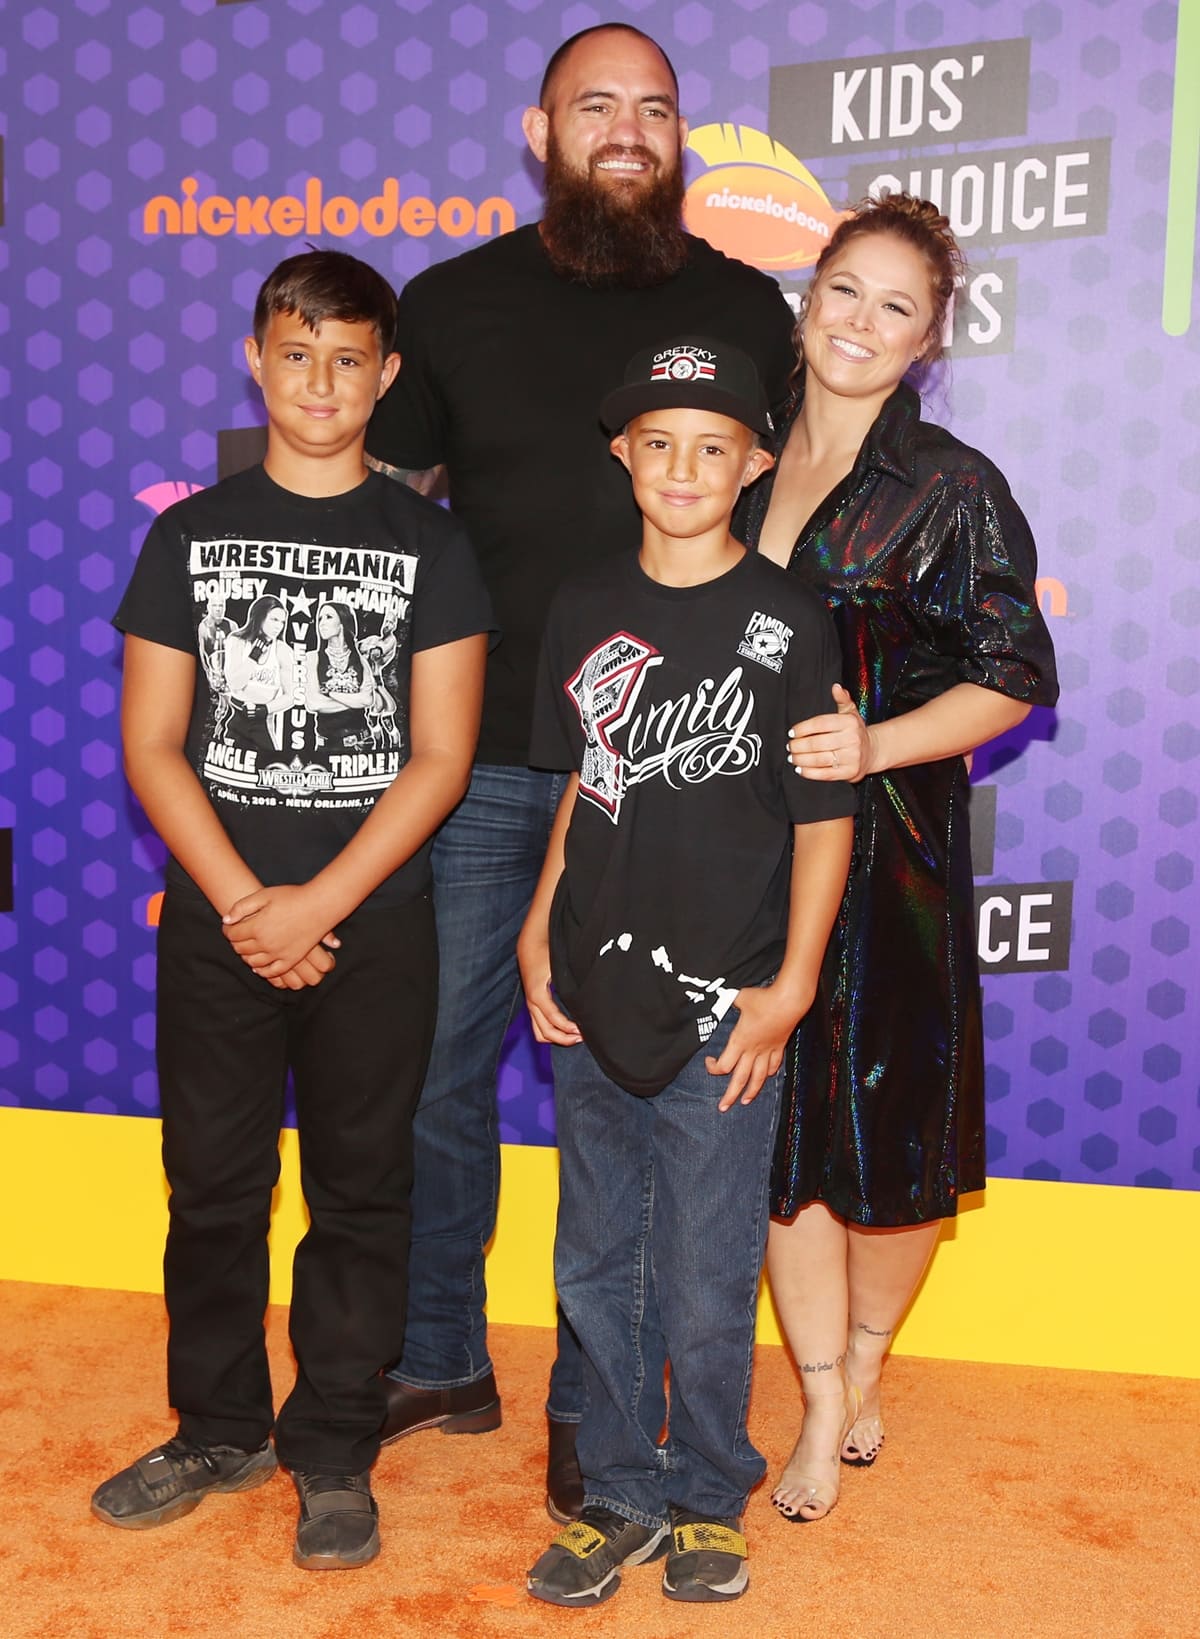 WWE wrestler Ronda Rousey and mixed martial artist Travis Browne with his sons Keawe and Kaleo